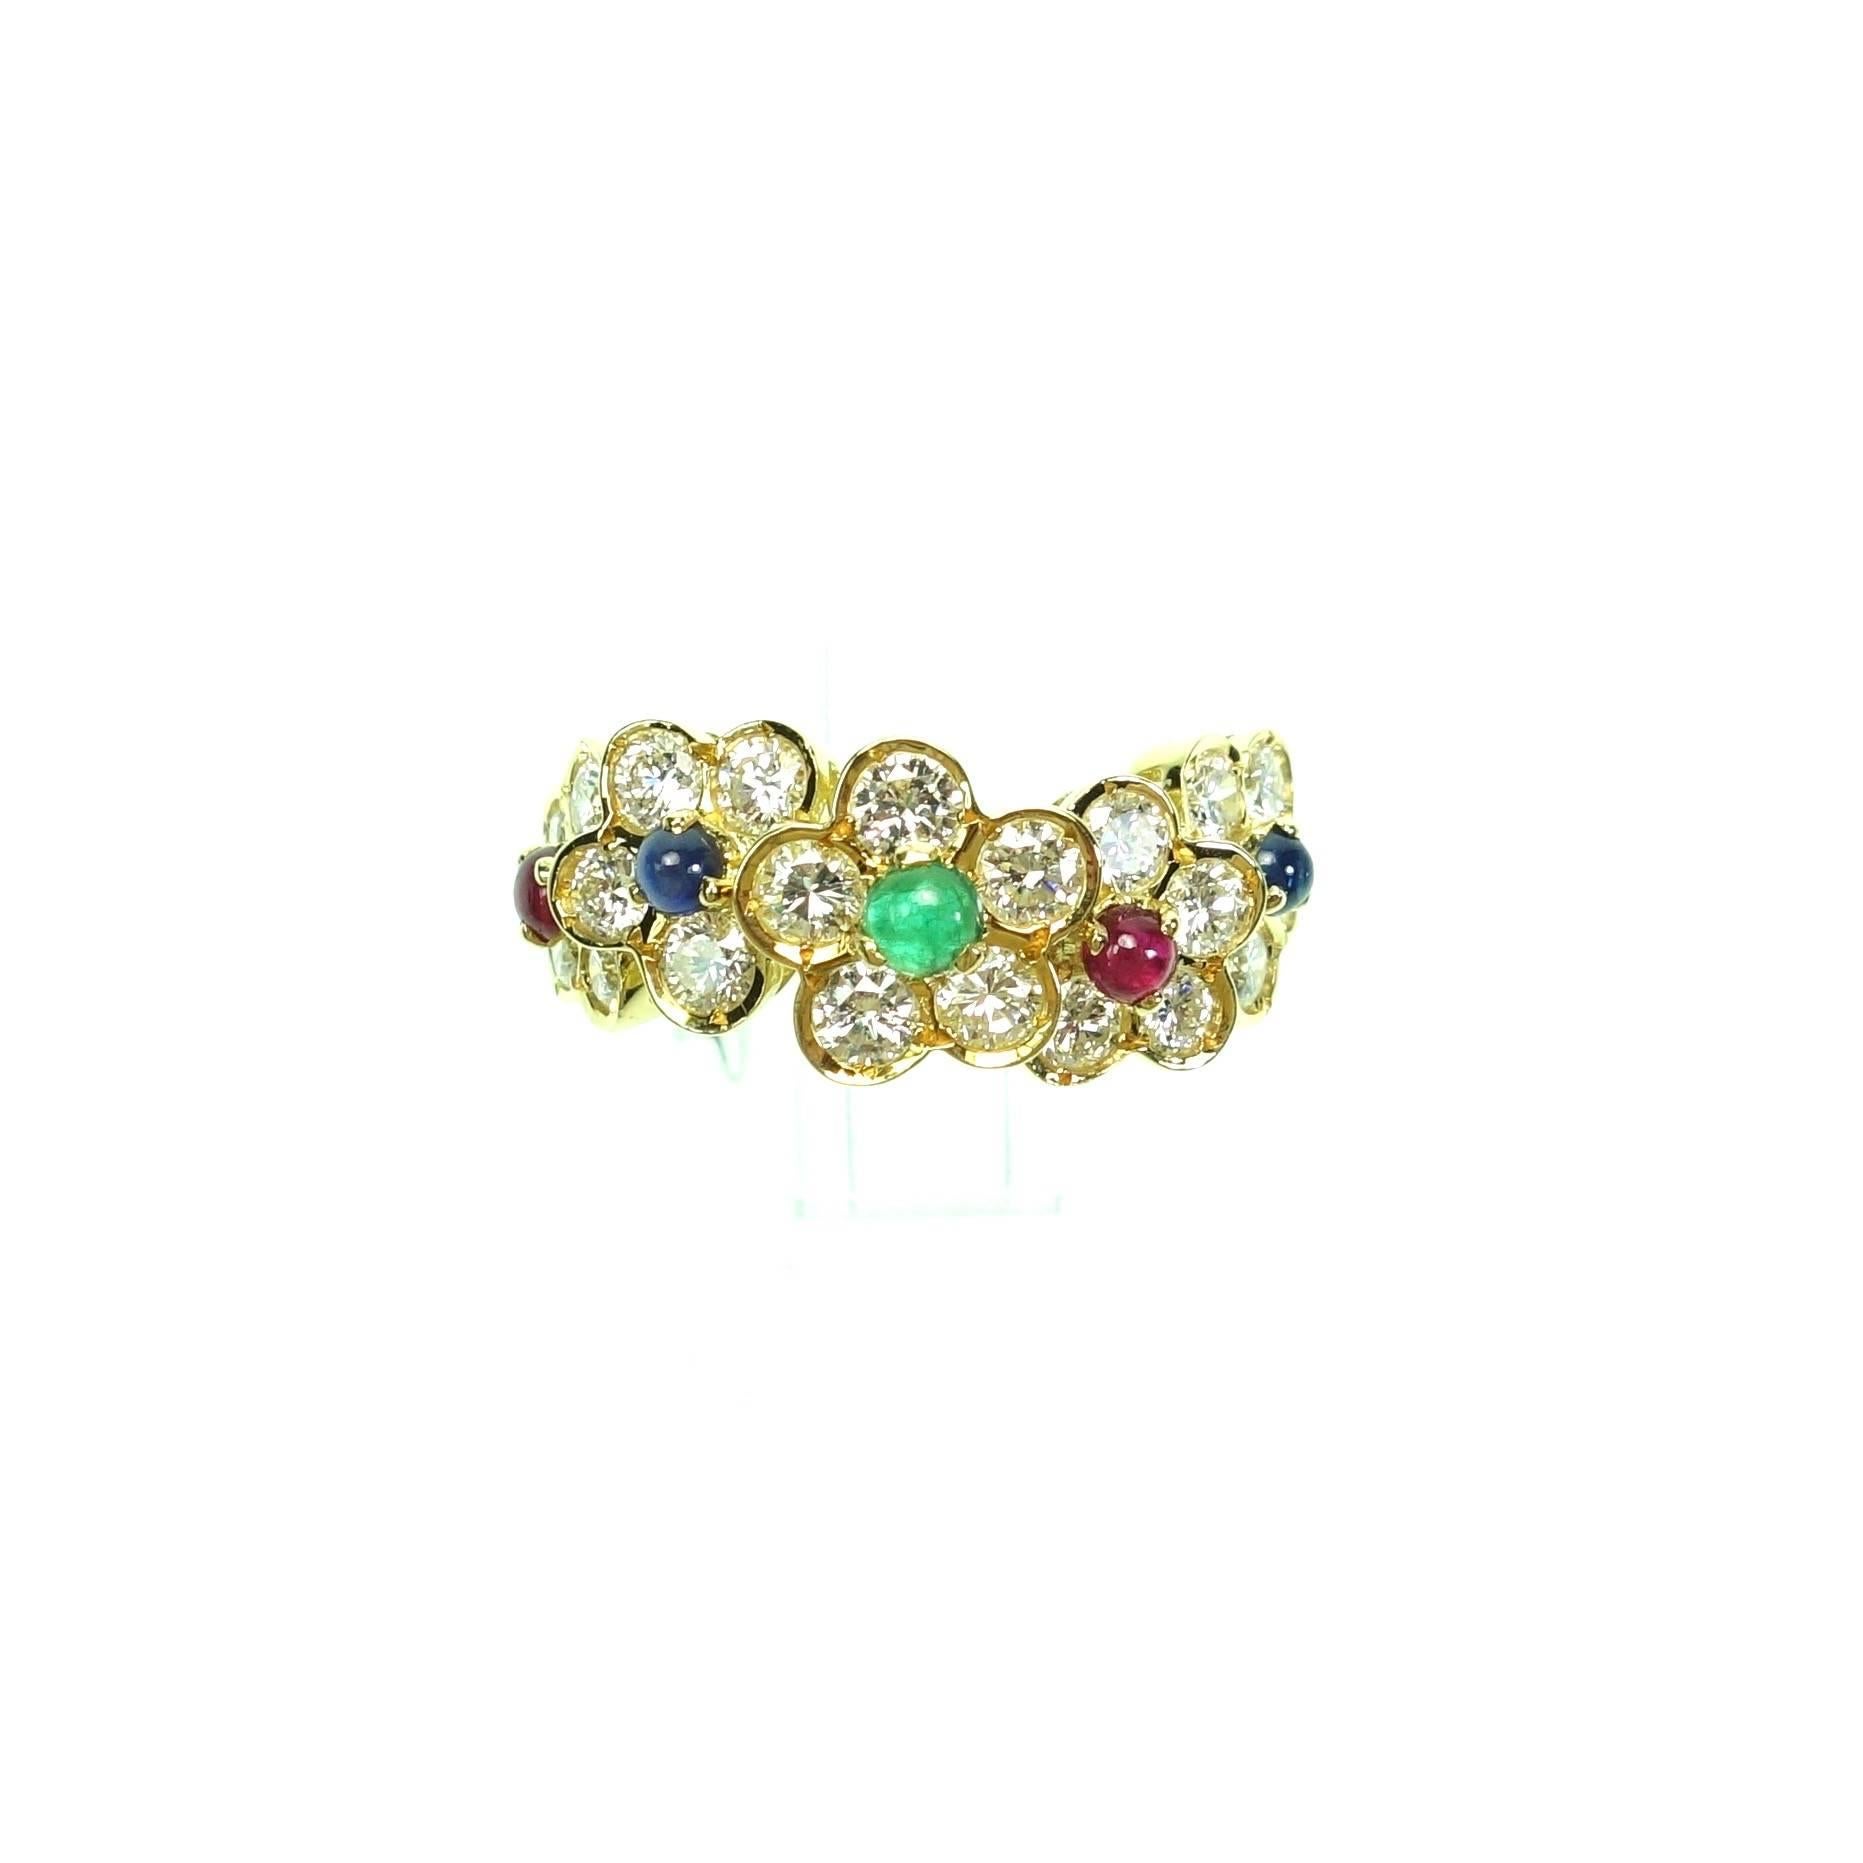 Rare Vintage Van Cleef & Arpels 18K Yellow Gold Emerald, Sapphire, Ruby Cabochon & Diamond five Fleurettes Ring. The 3-tiered front features 5 diamond florets with emerald, ruby and sapphire centers. Stone Details: 21 brilliant round cut diamonds,